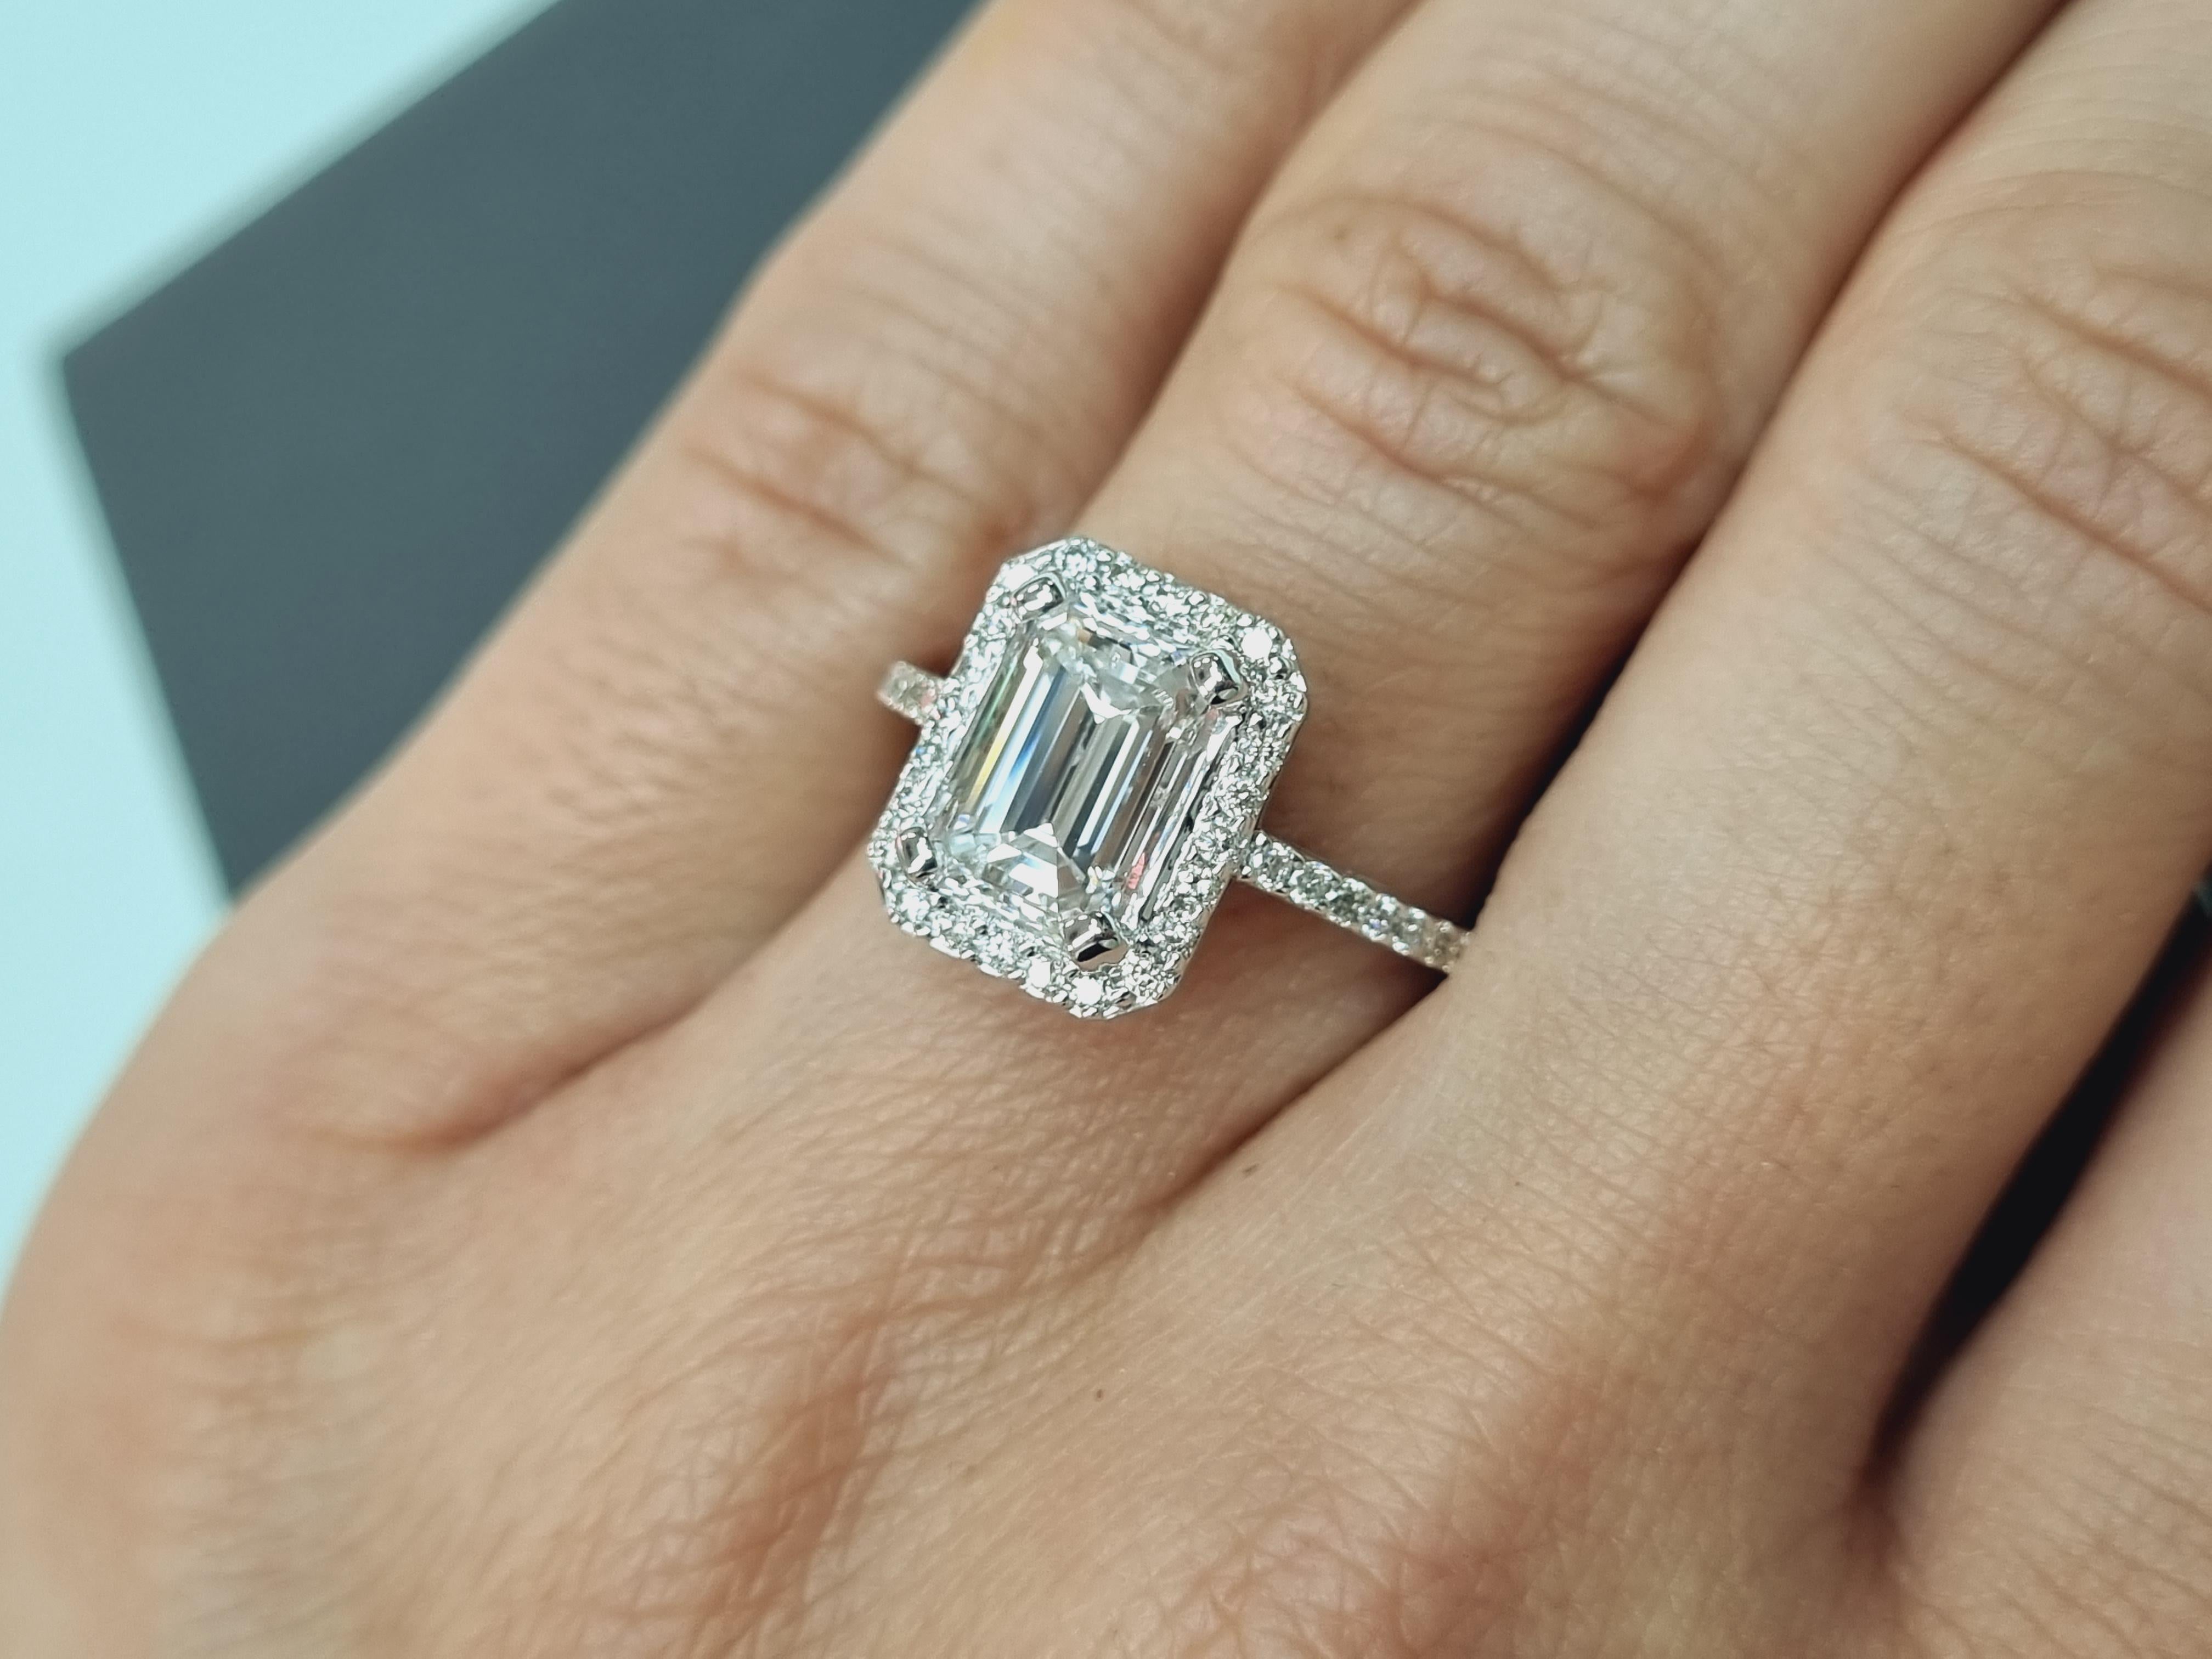 Introducing our exquisite 18k white gold Emerald Cut Diamond Halo Engagement Ring, a true embodiment of timeless elegance and sophistication. The focal point of this mesmerizing ring is a magnificent 2.08-carat emerald cut diamond, radiating